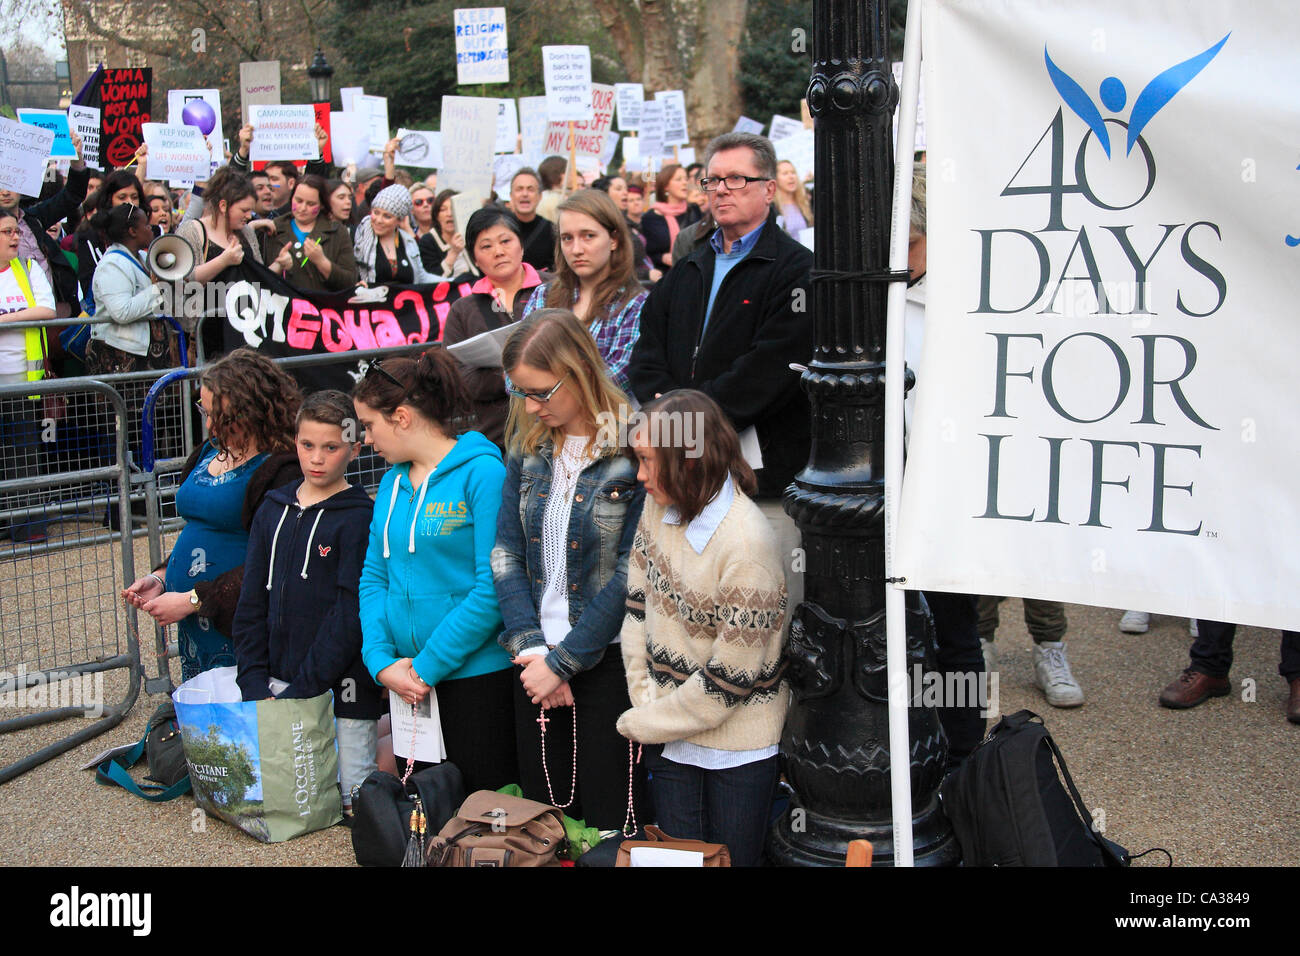 London, UK. 30 Mar, 2012. 40 Days for Life and Pro Choice Demo at Bpas abortion Clinic in London Stock Photo